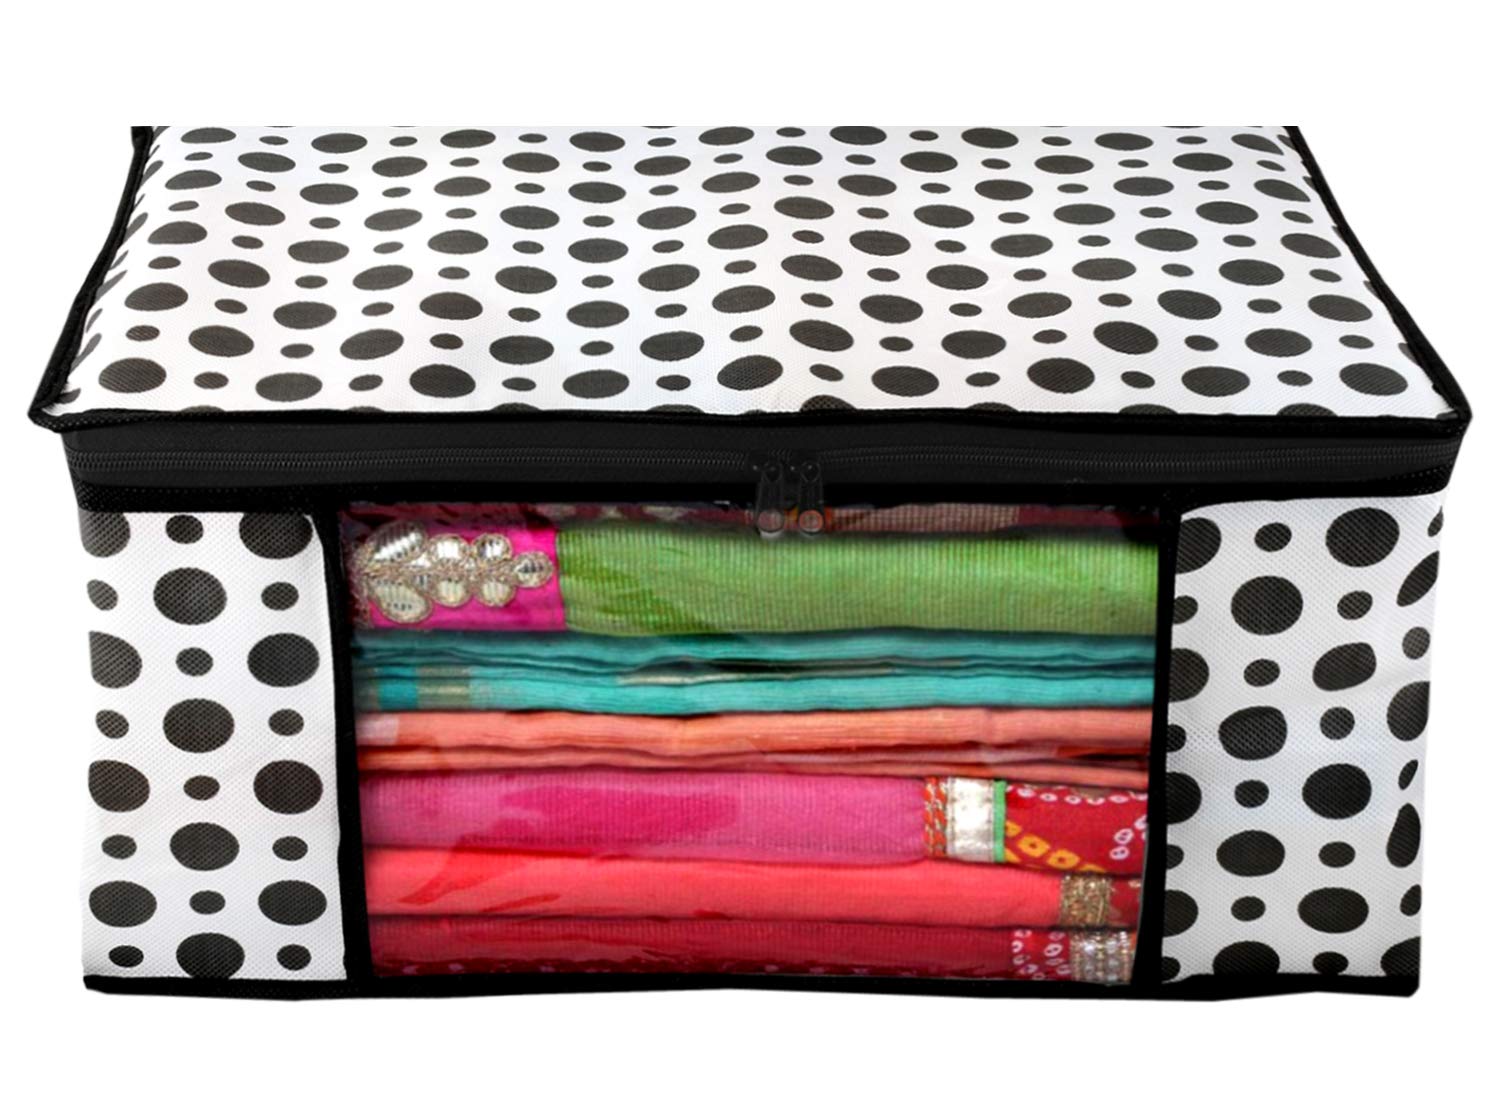 Kuber Industries Polka Dots Design 2 Piece Non Woven Fabric Saree Cover/Clothes Organiser for Wardrobe Set with Transparent Window, Extra Large, (Black & White) -CTKTC038086